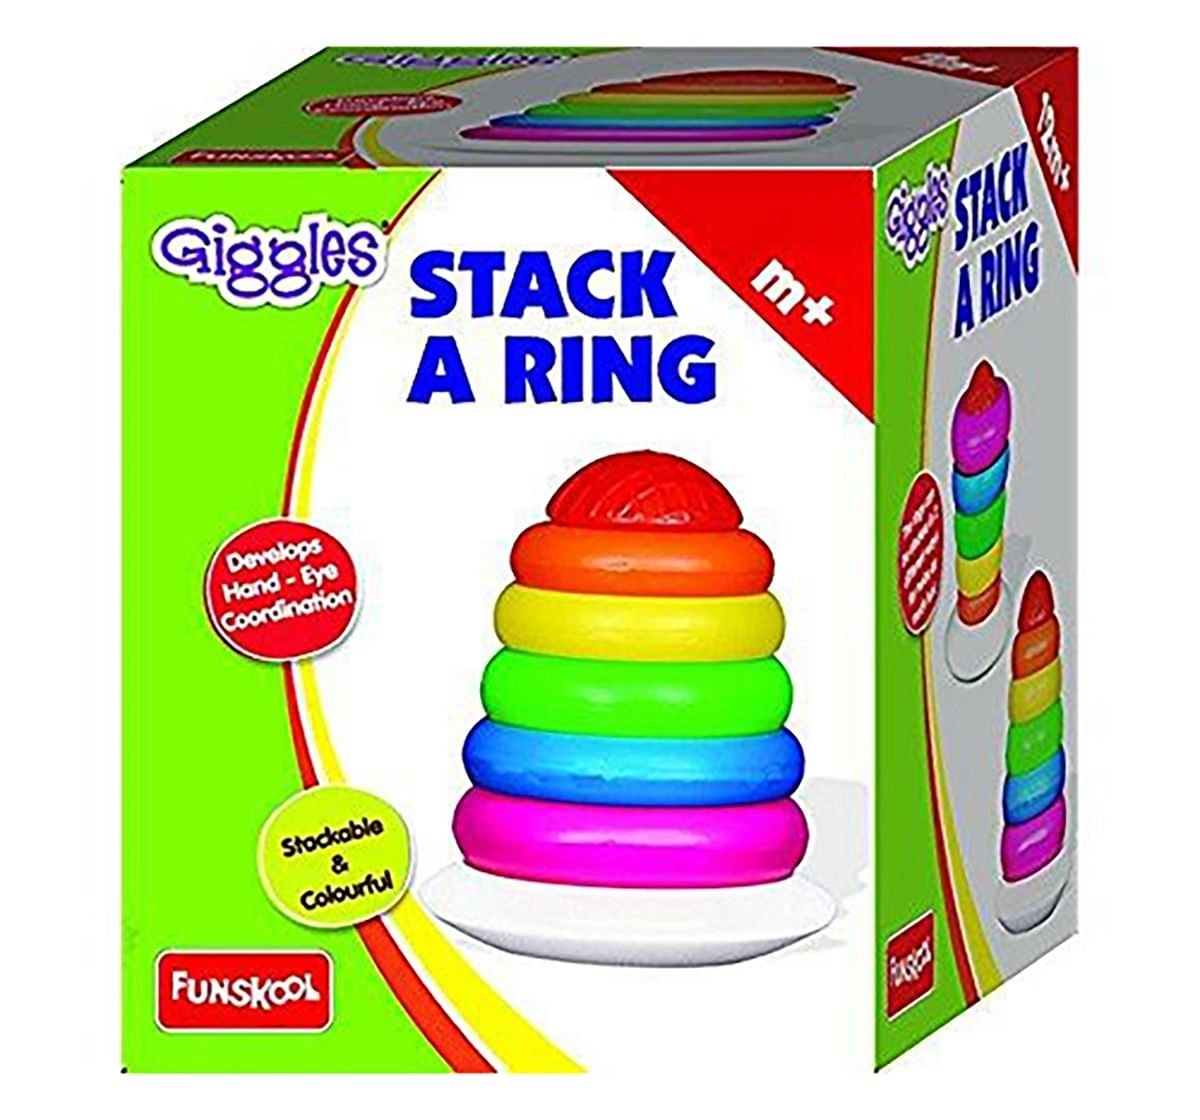 Gamie Floating Ring Toss Game for Kids, Outdoor Carnival Game Set with ·  Art Creativity